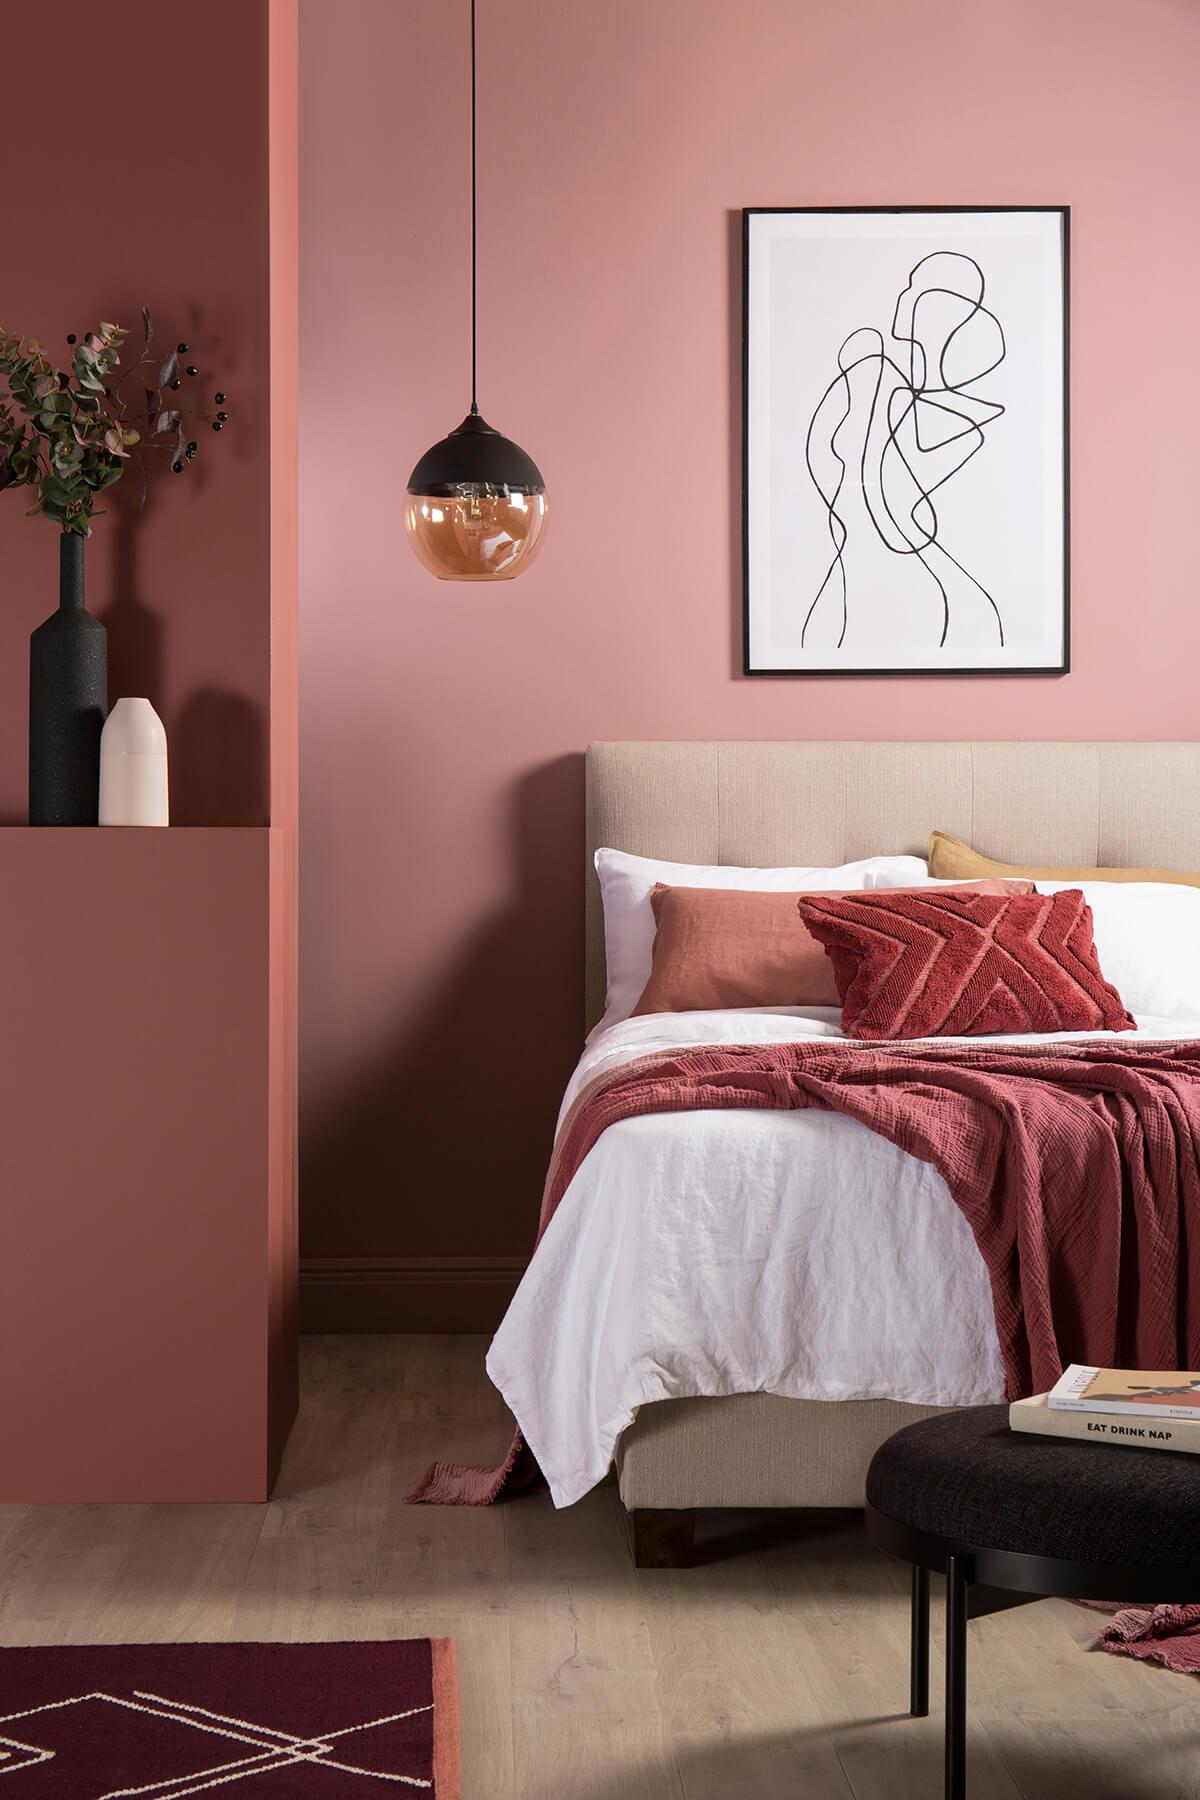 A cosy Scandi design style bedroom with a blush tone backdrop and neutral quilted bed